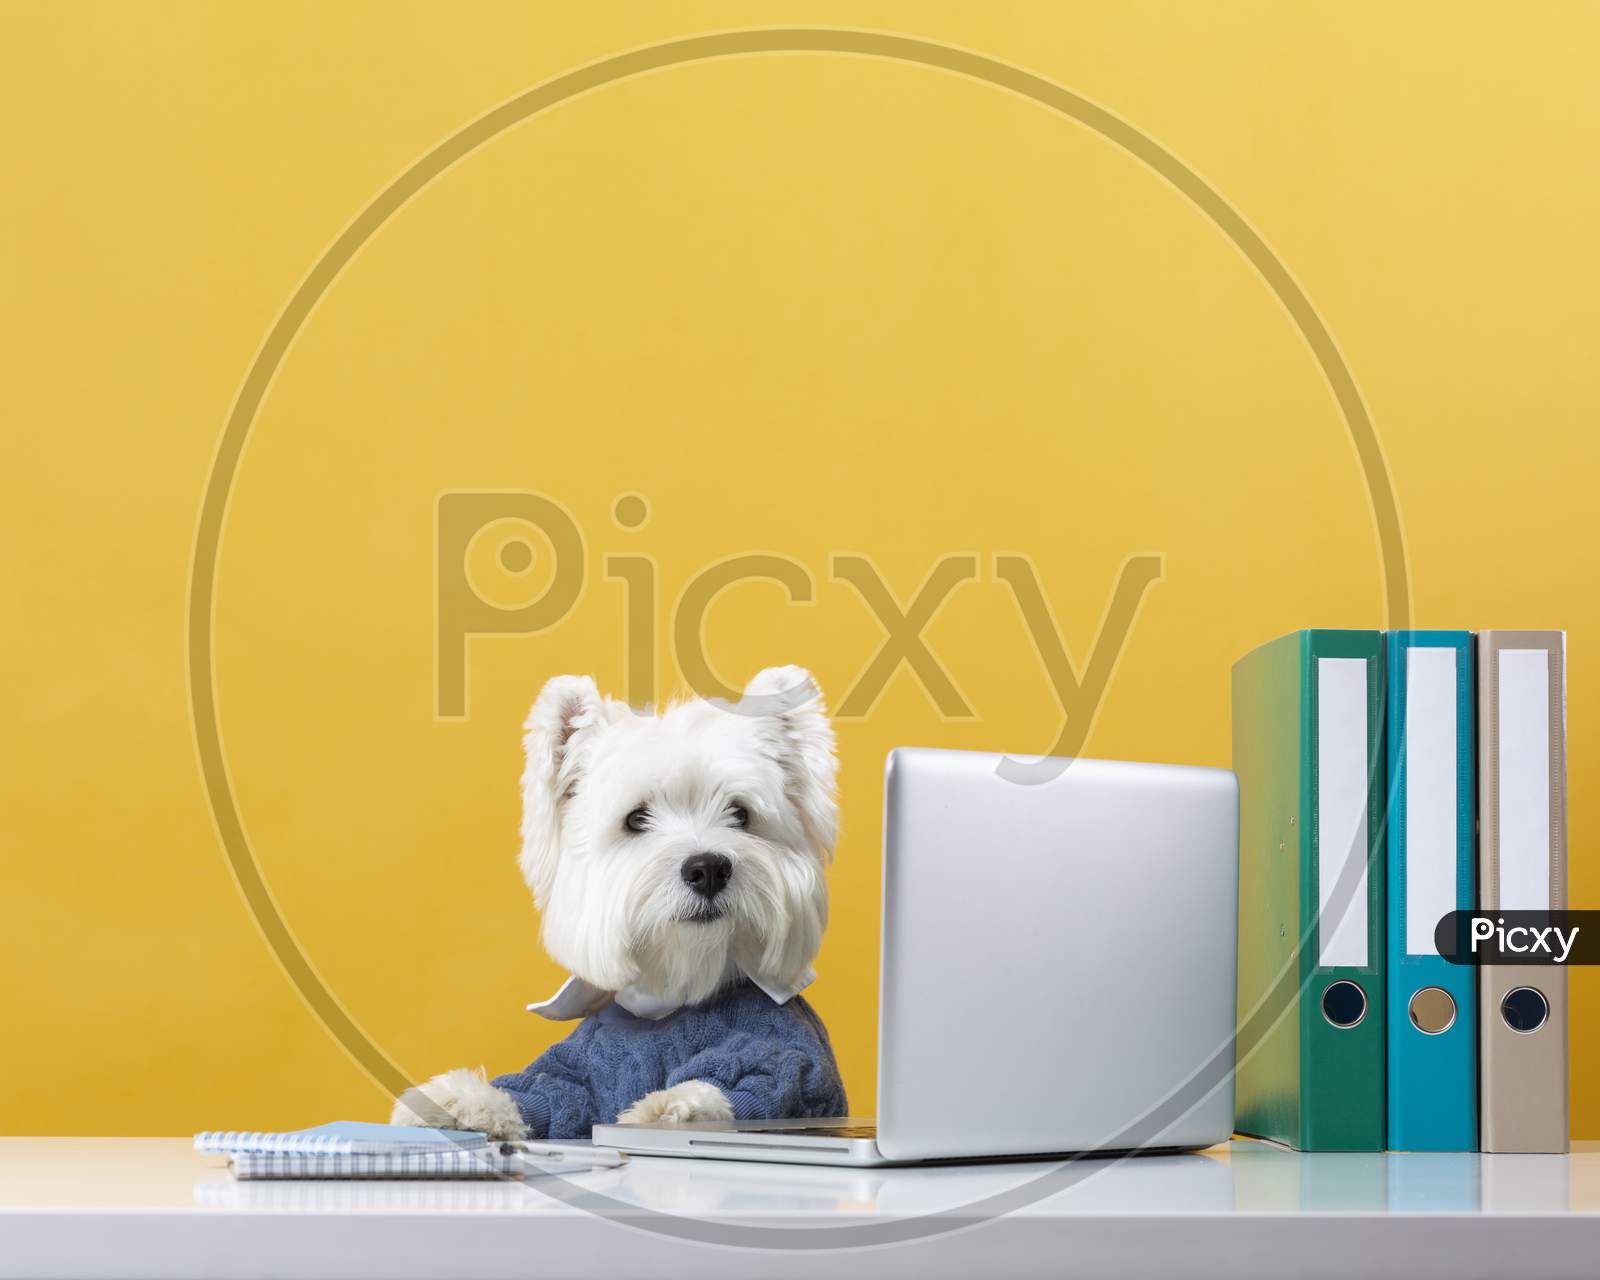 Cute little dog impersonating a business person, puppy in a notebook